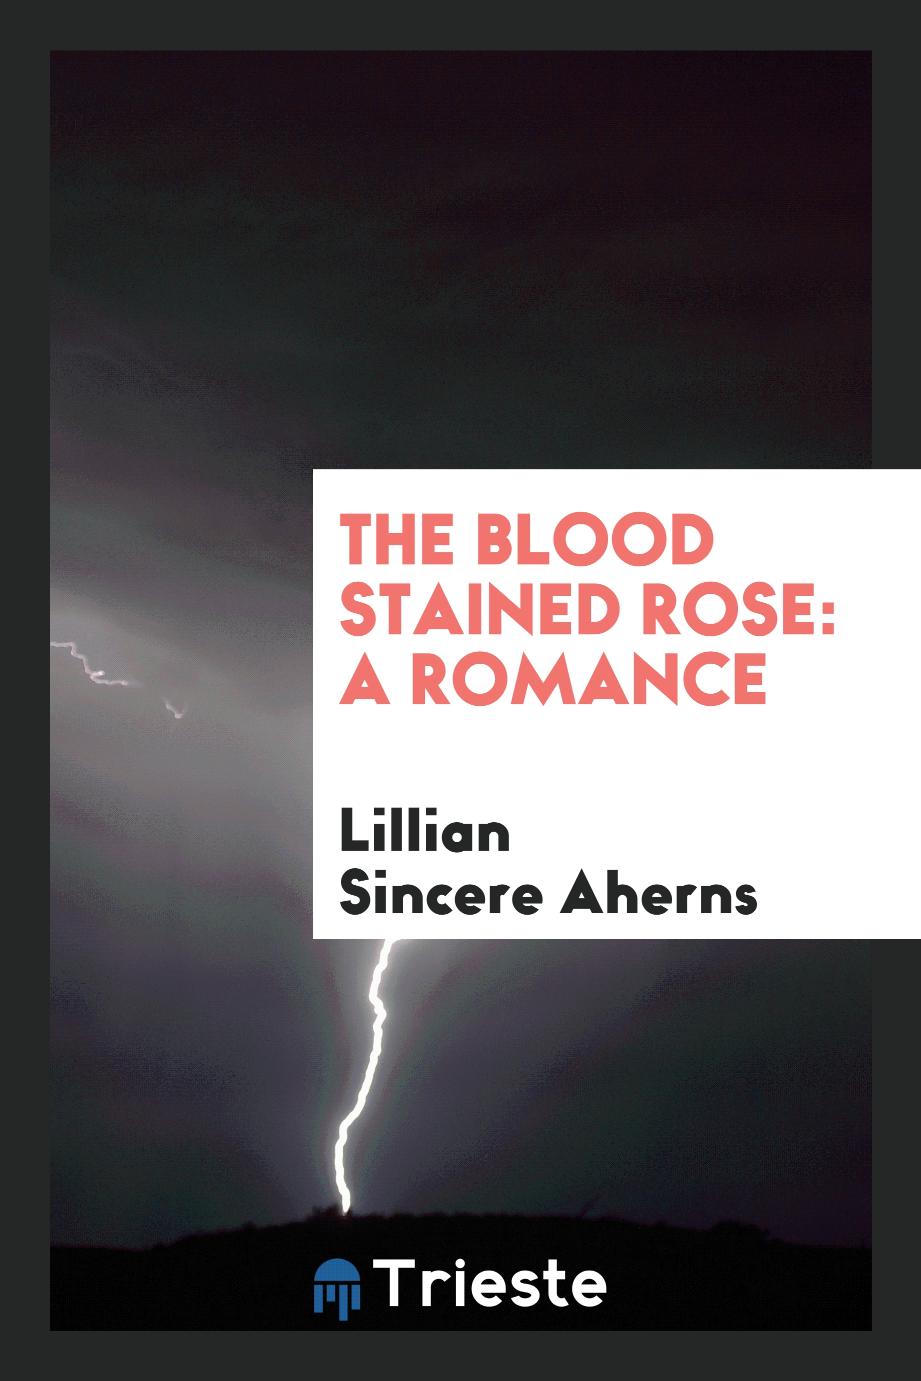 The Blood Stained Rose: A Romance